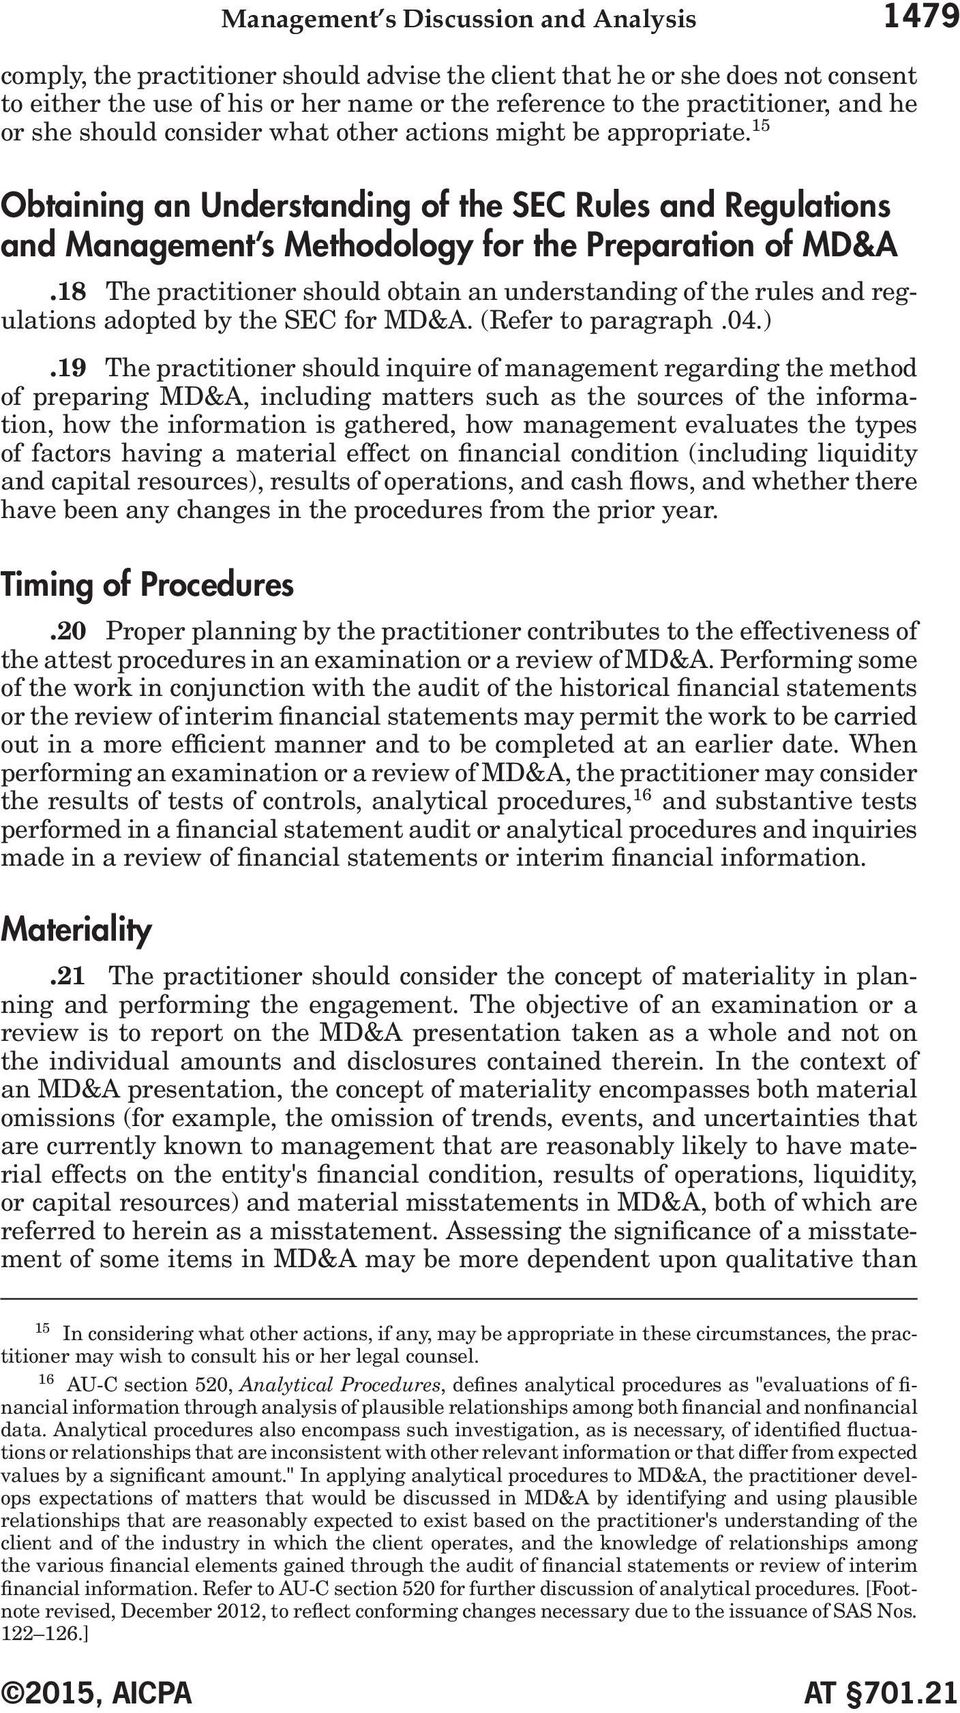 18 The practitioner should obtain an understanding of the rules and regulations adopted by the SEC for MD&A. (Refer to paragraph.04.).